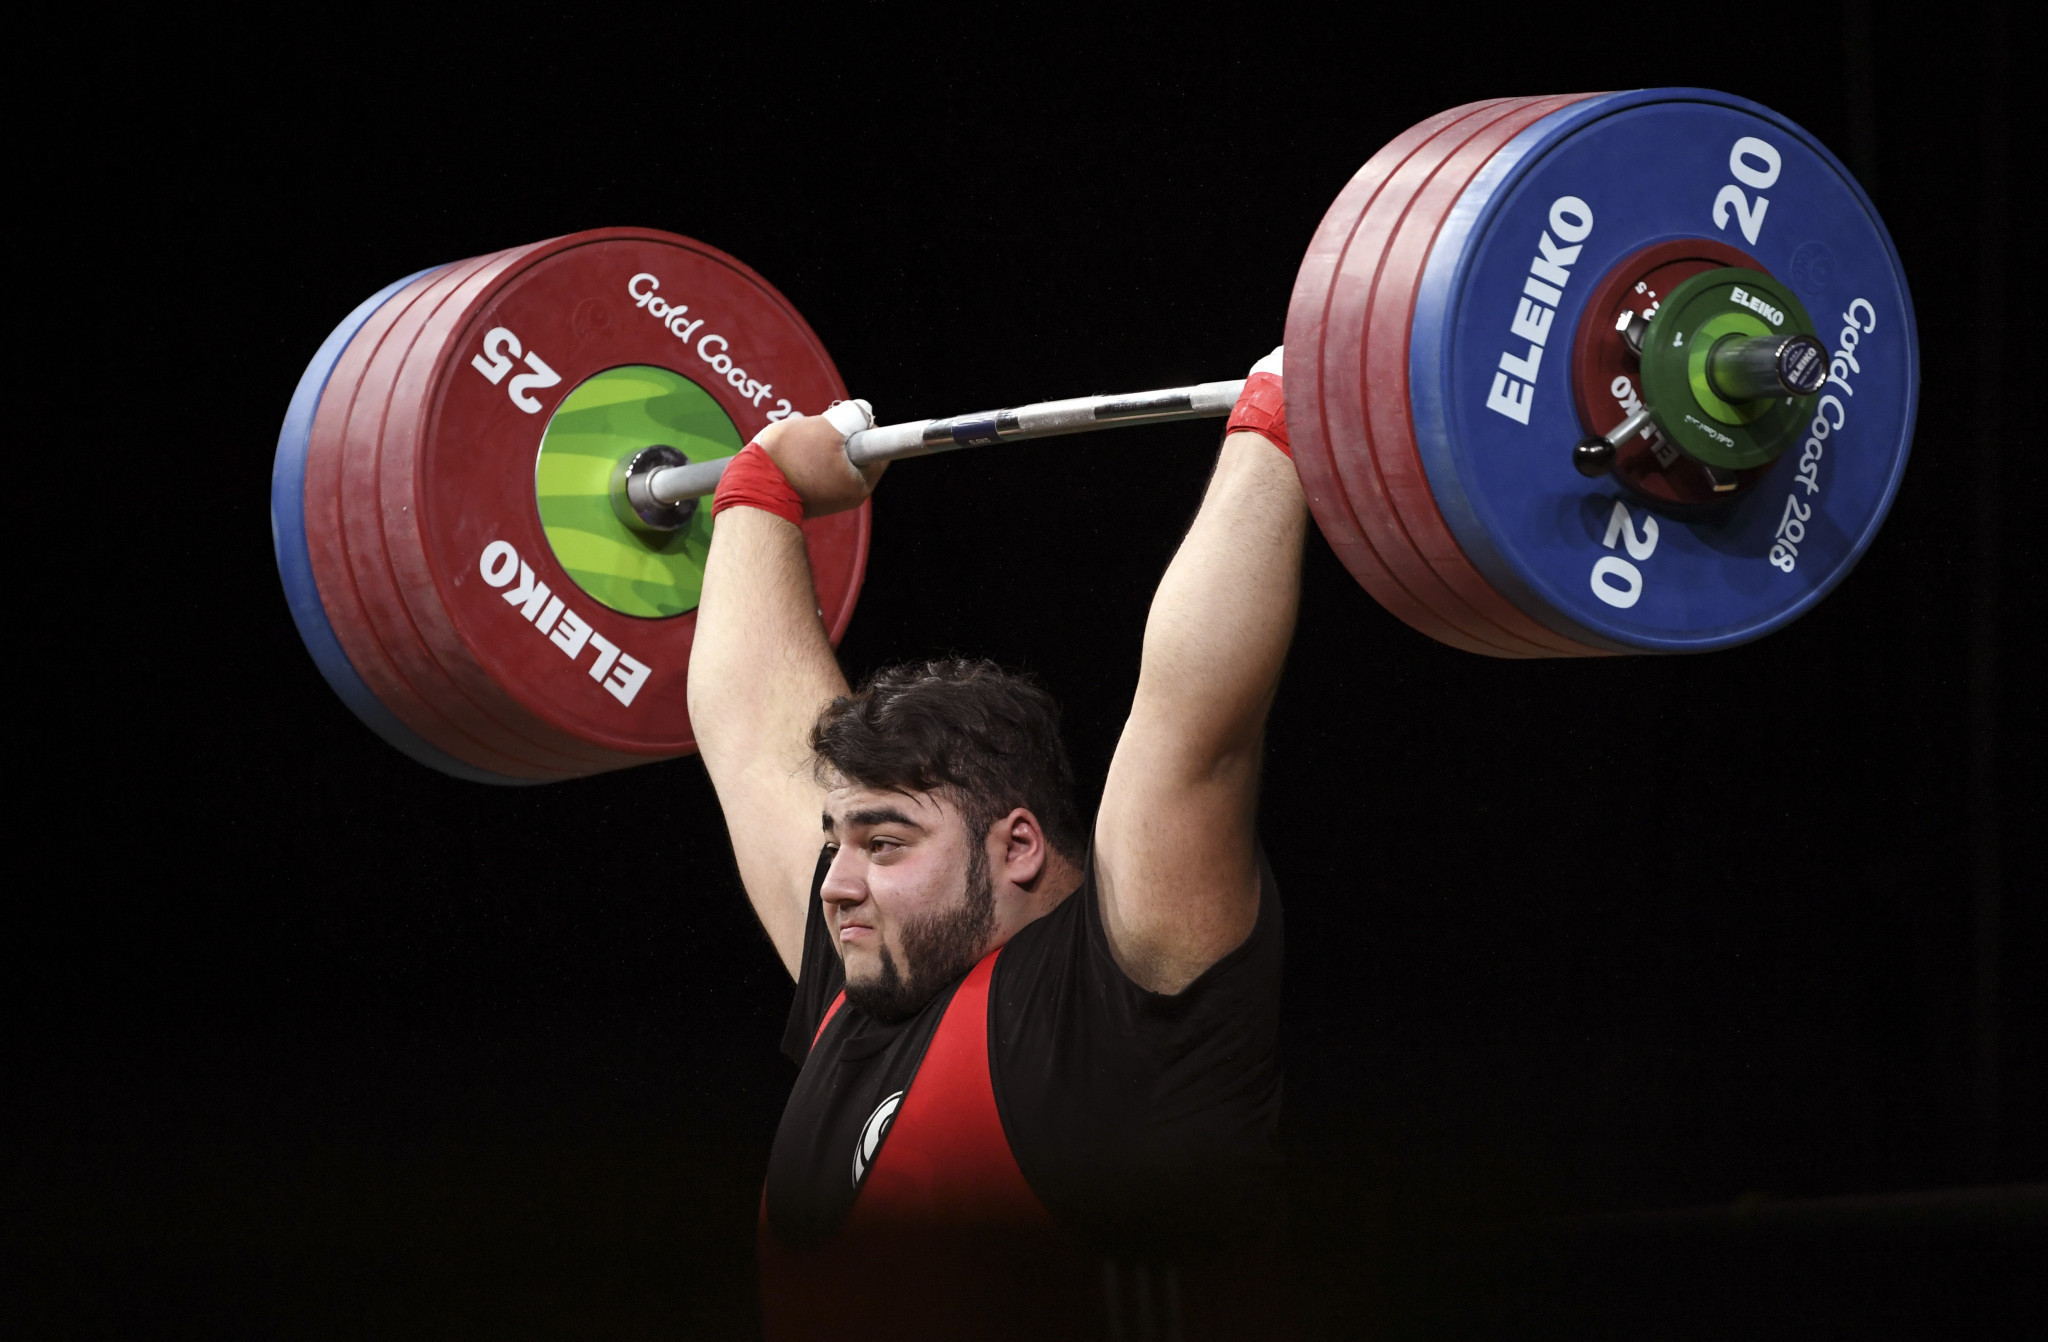 Pakistan's Muhammad Nooh Dastgir Butt was the overall bronze medallist in the men's over-105kg category ©Getty Images